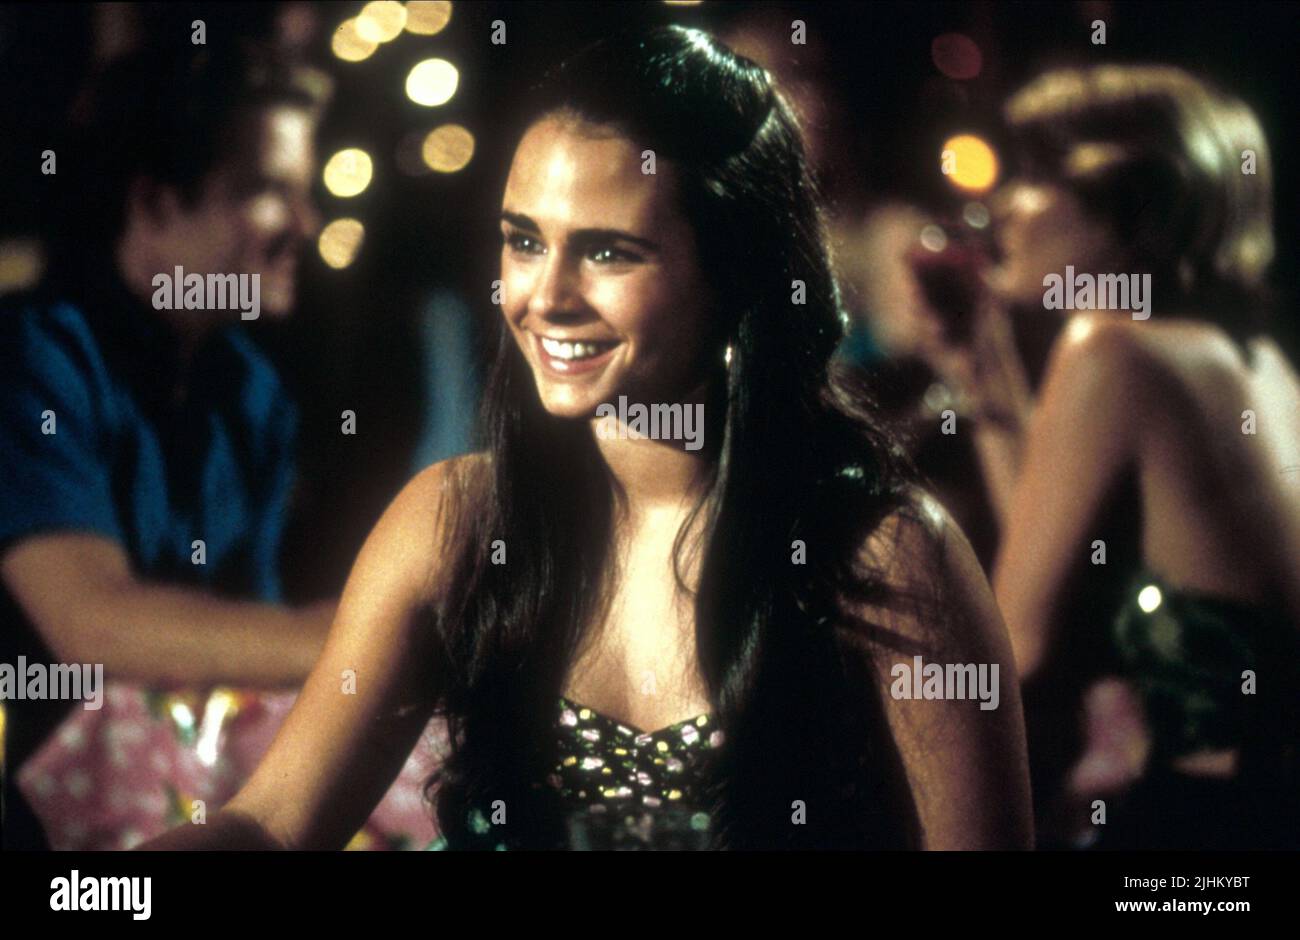 JORDANA BREWSTER, THE FAST AND THE FURIOUS, 2001 Stock Photo